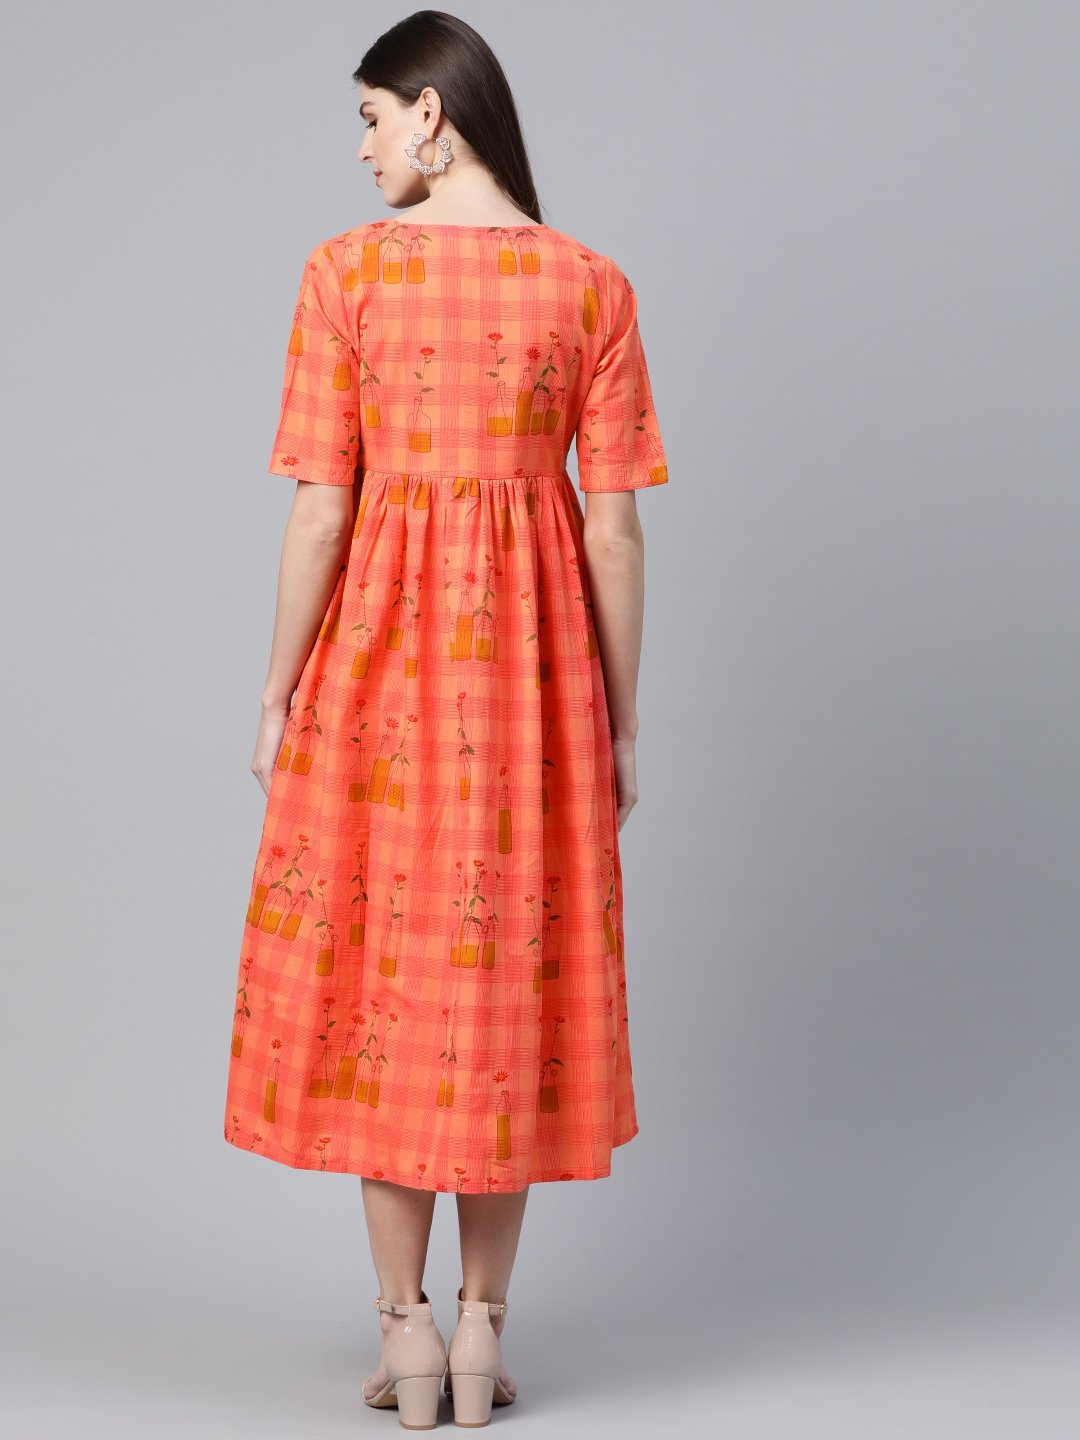 Women's  Peach-Coloured Checked with Conversational Printed A-Line Dress - AKS